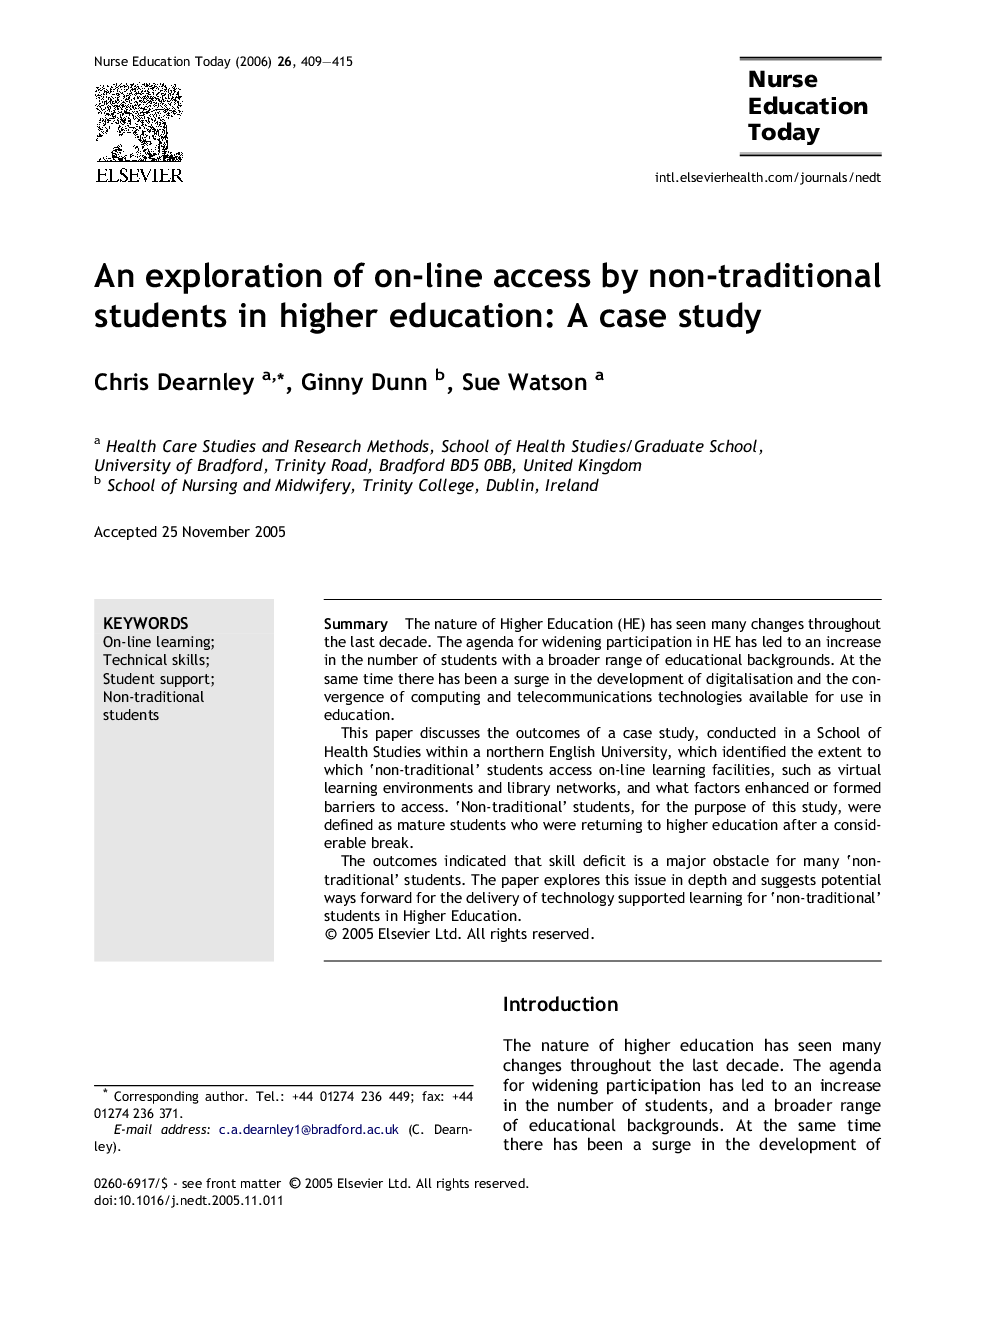 An exploration of on-line access by non-traditional students in higher education: A case study